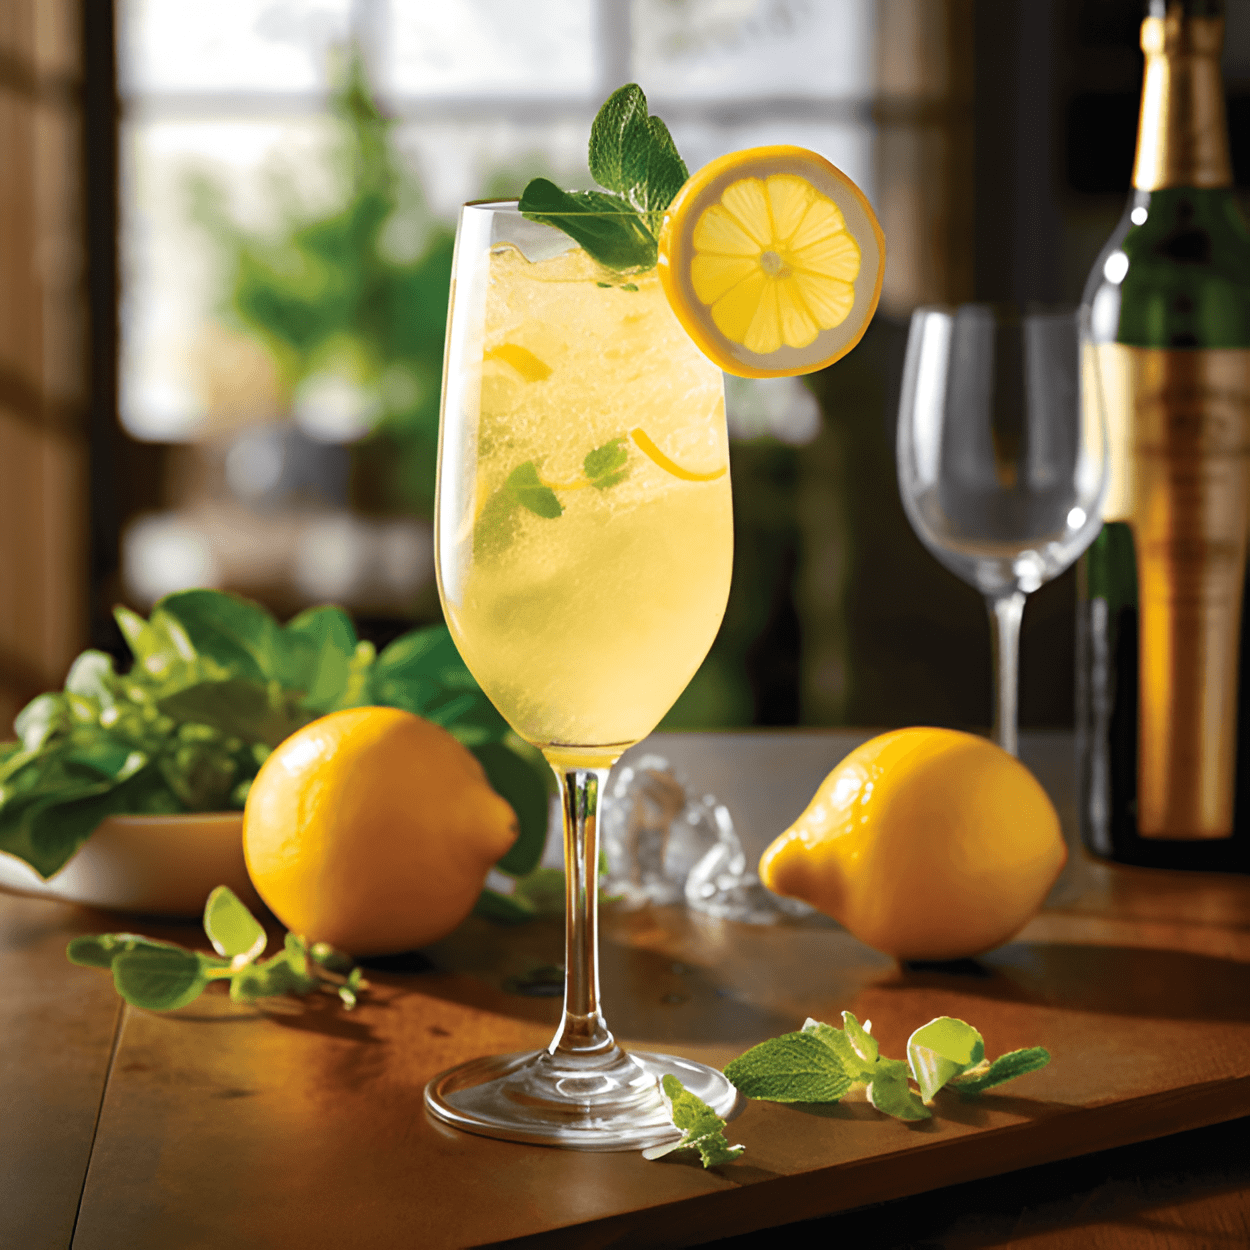 Cointreau Kiss Cocktail Recipe - The Cointreau Kiss is a sweet and citrusy cocktail with a hint of sourness. It's a light and refreshing drink that's perfect for a hot summer day. The sweetness of the Cointreau is perfectly balanced by the sourness of the lemon juice, making it a delightful cocktail to enjoy.